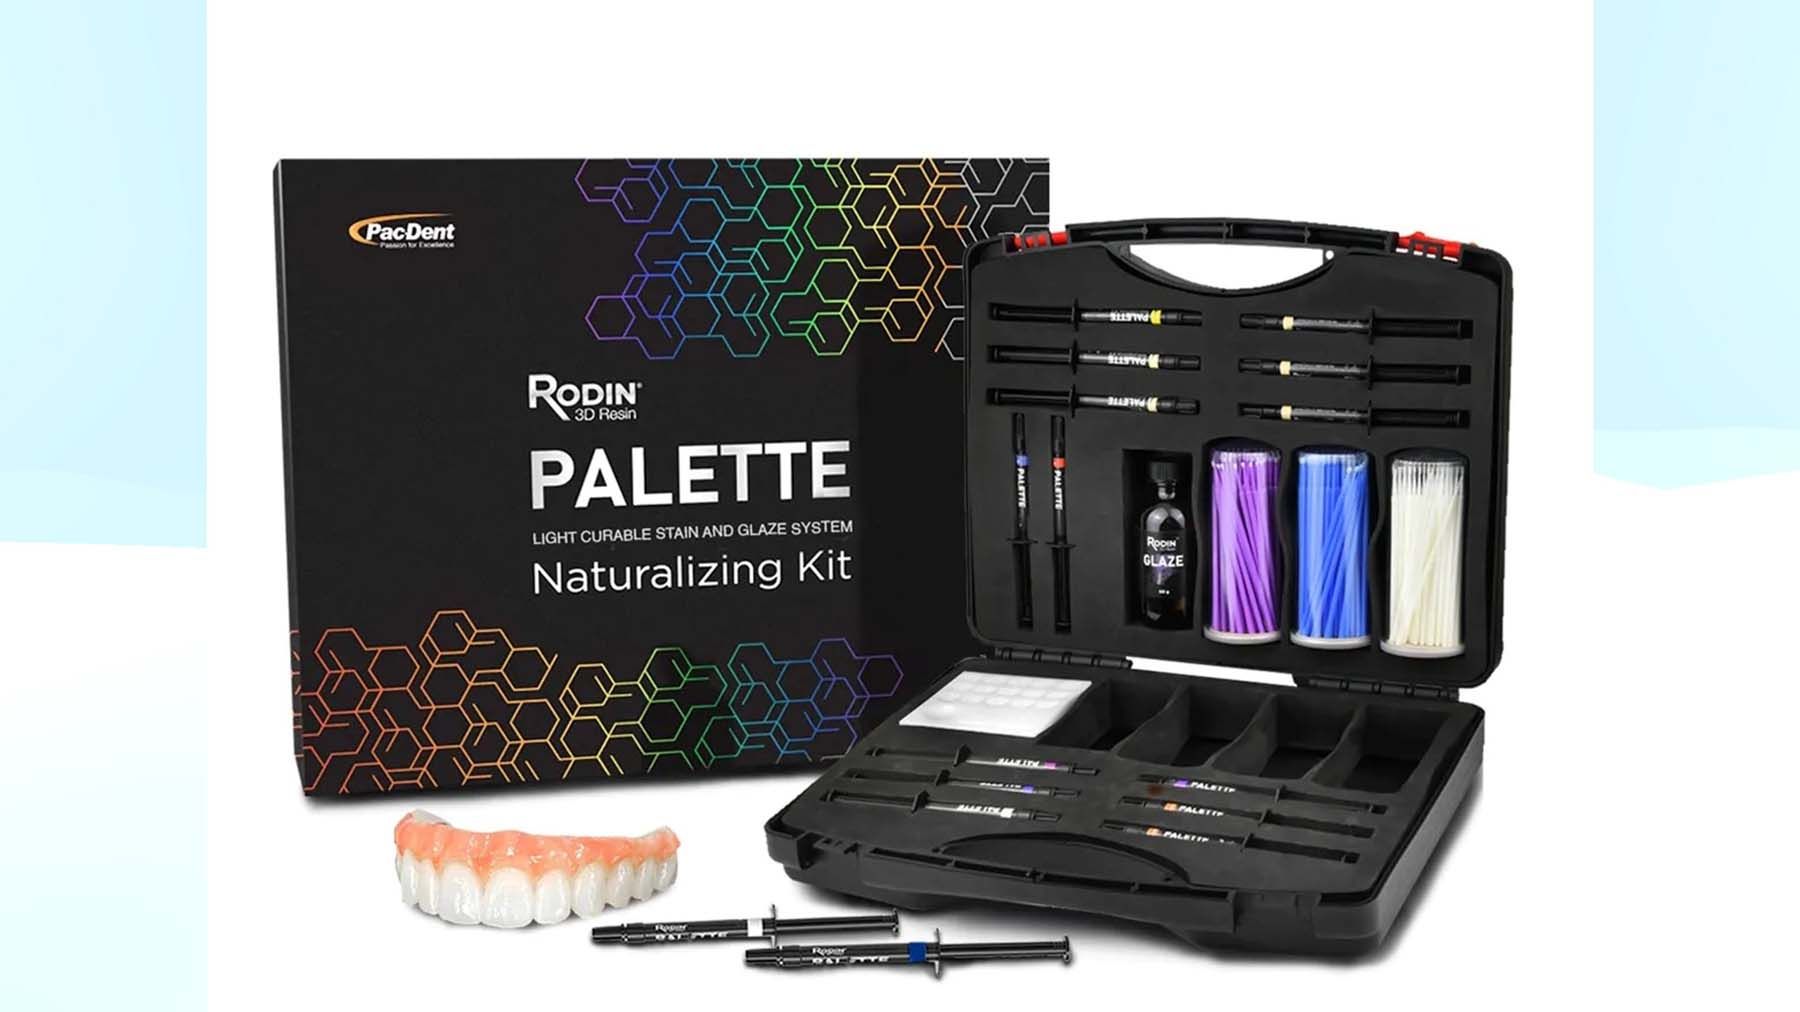 Figure 2. This kit from Pac-Dent offers unparalleled control and precision, enabling users to achieve optimal esthetic results. Available in a diverse range of shades, clinicians can easily customize restorations, ensuring a perfect blend with patients’ dentition and resulting in a seamless, great-looking smile.